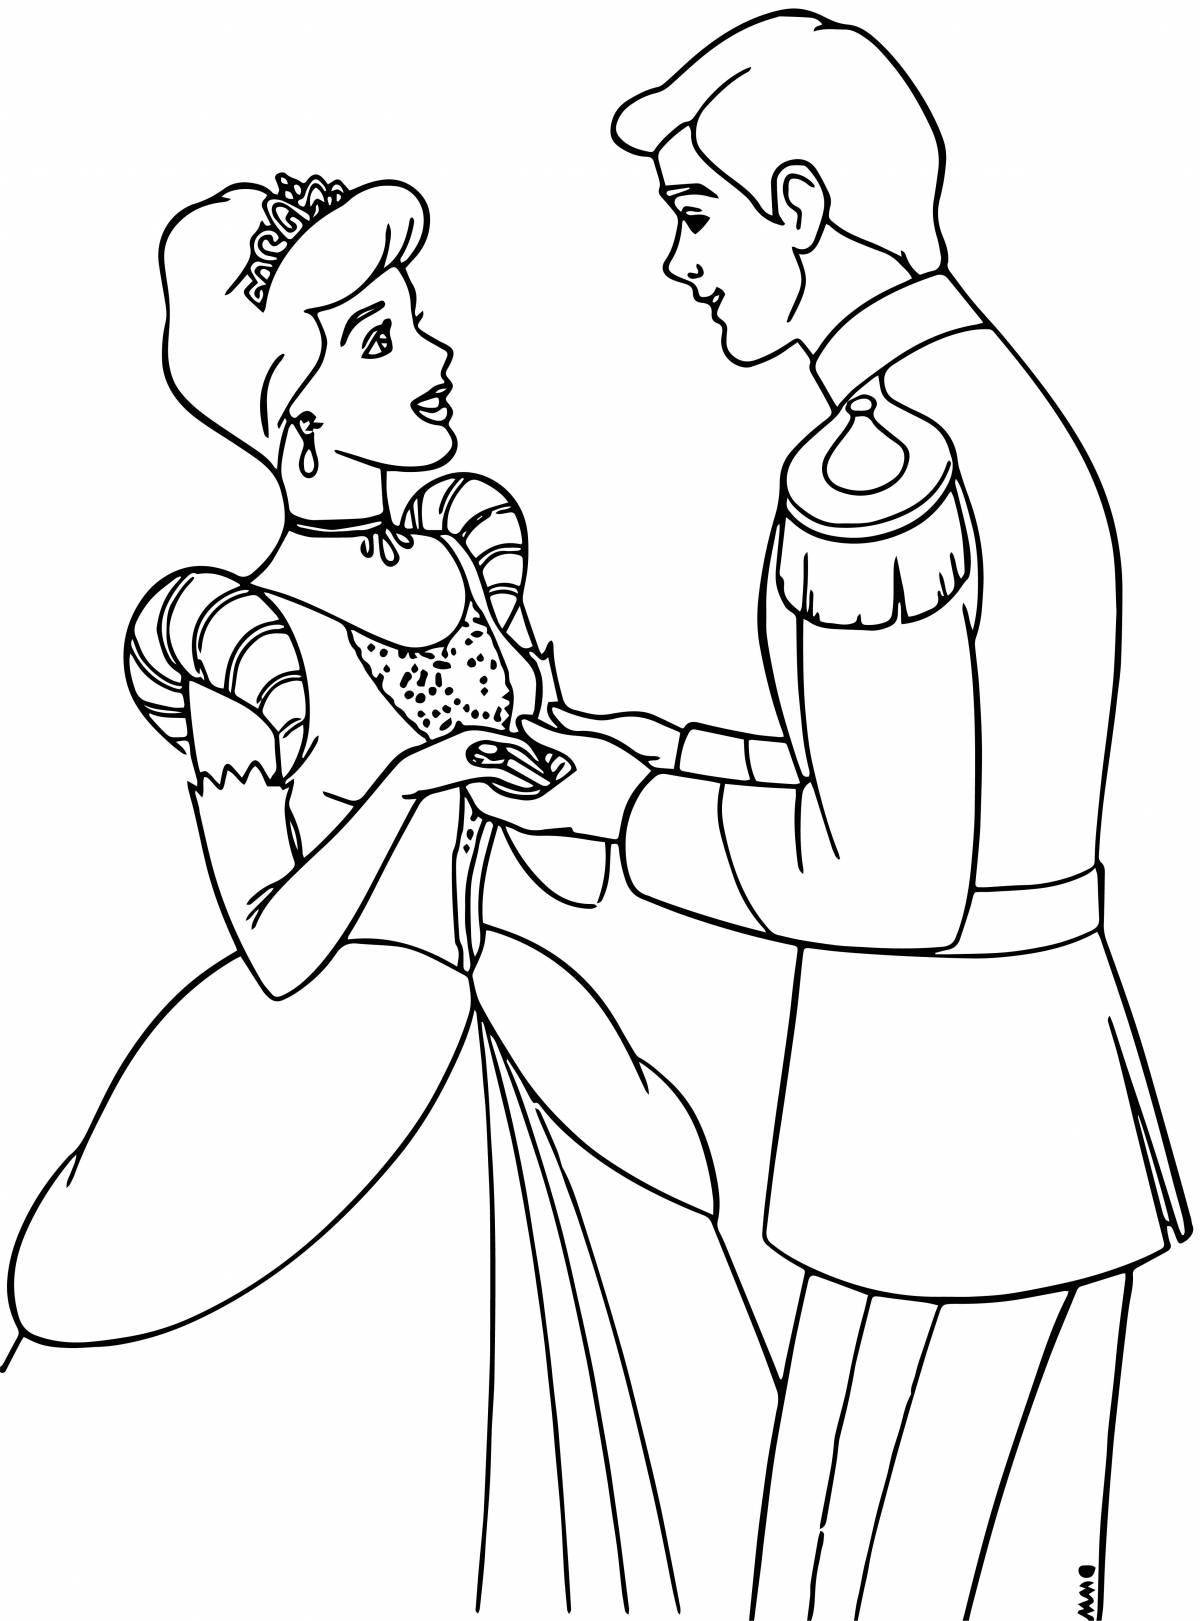 Prince Charming coloring book